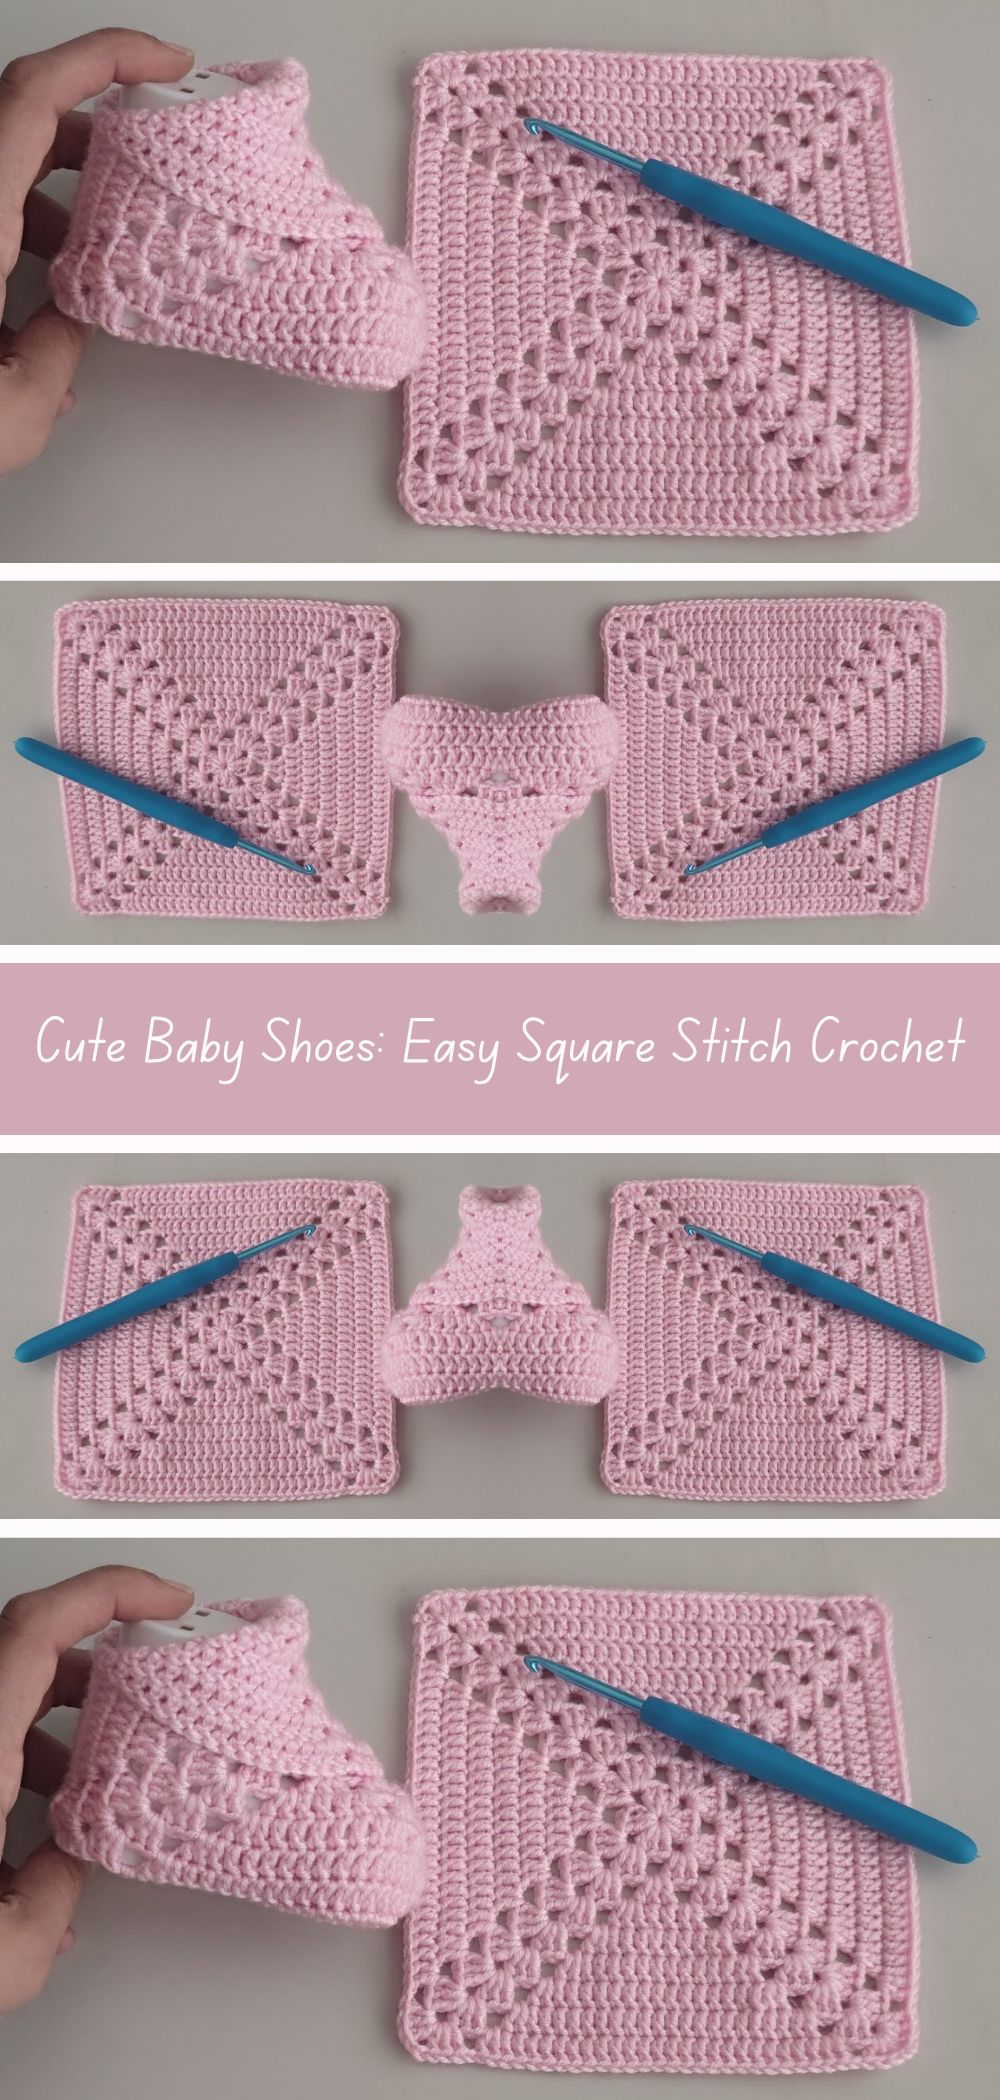 Cute Baby Shoes: Square Stitch Crochet Tutorial - Perfect for beginners, create adorable baby shoes with this simple crochet technique